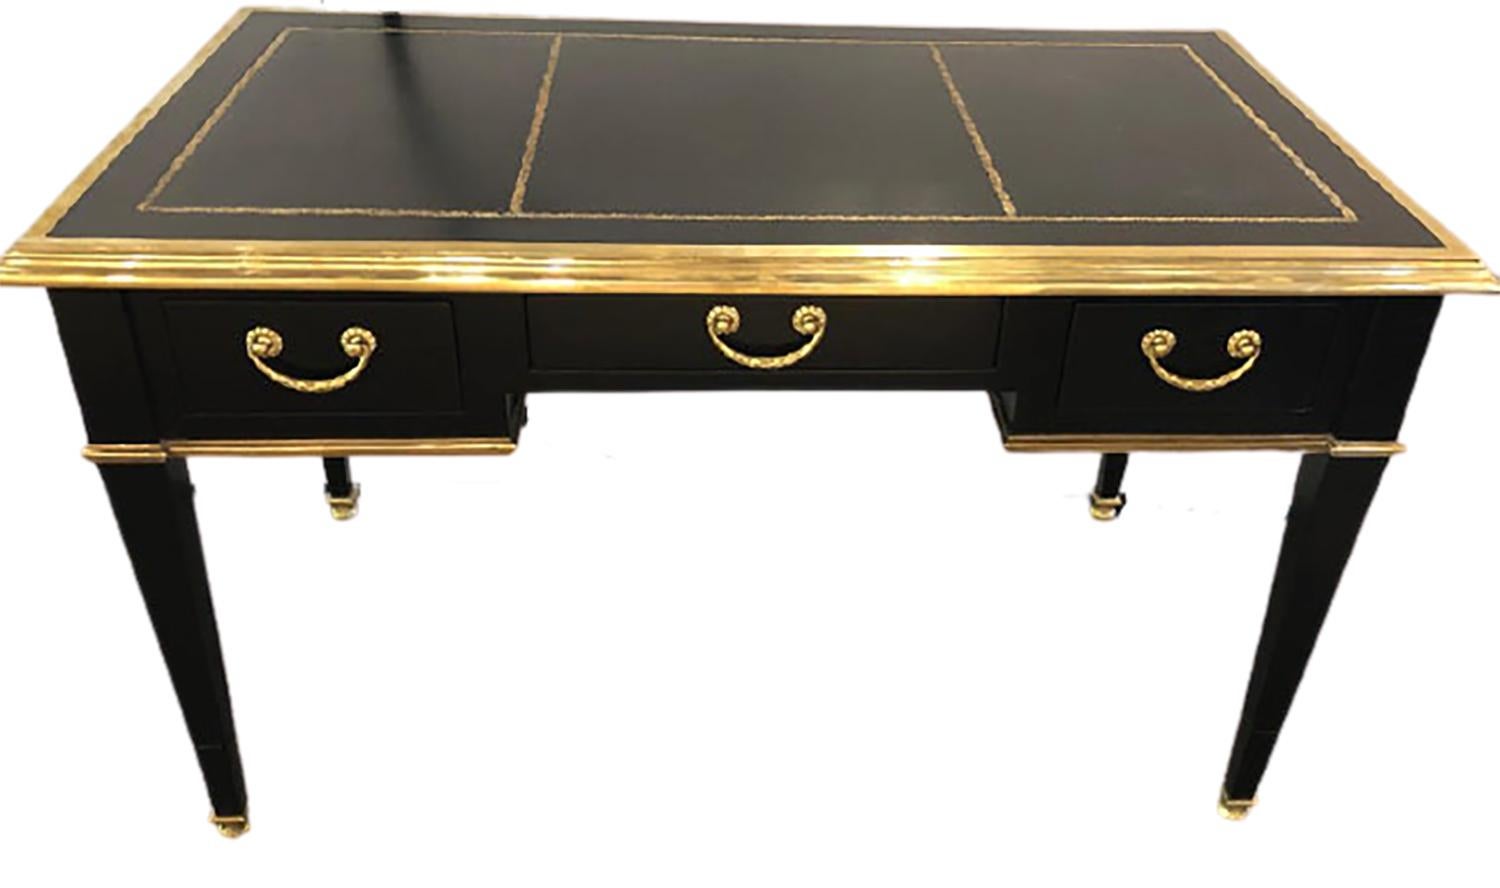 A Maison Jansen Hollywood Regency style writing desk in ebony with bronze mounts having oak secondary’s. This early desk having a thick bronze framed galleried leather tooled tabletop is simply stunning. Having been recently refinished and all the